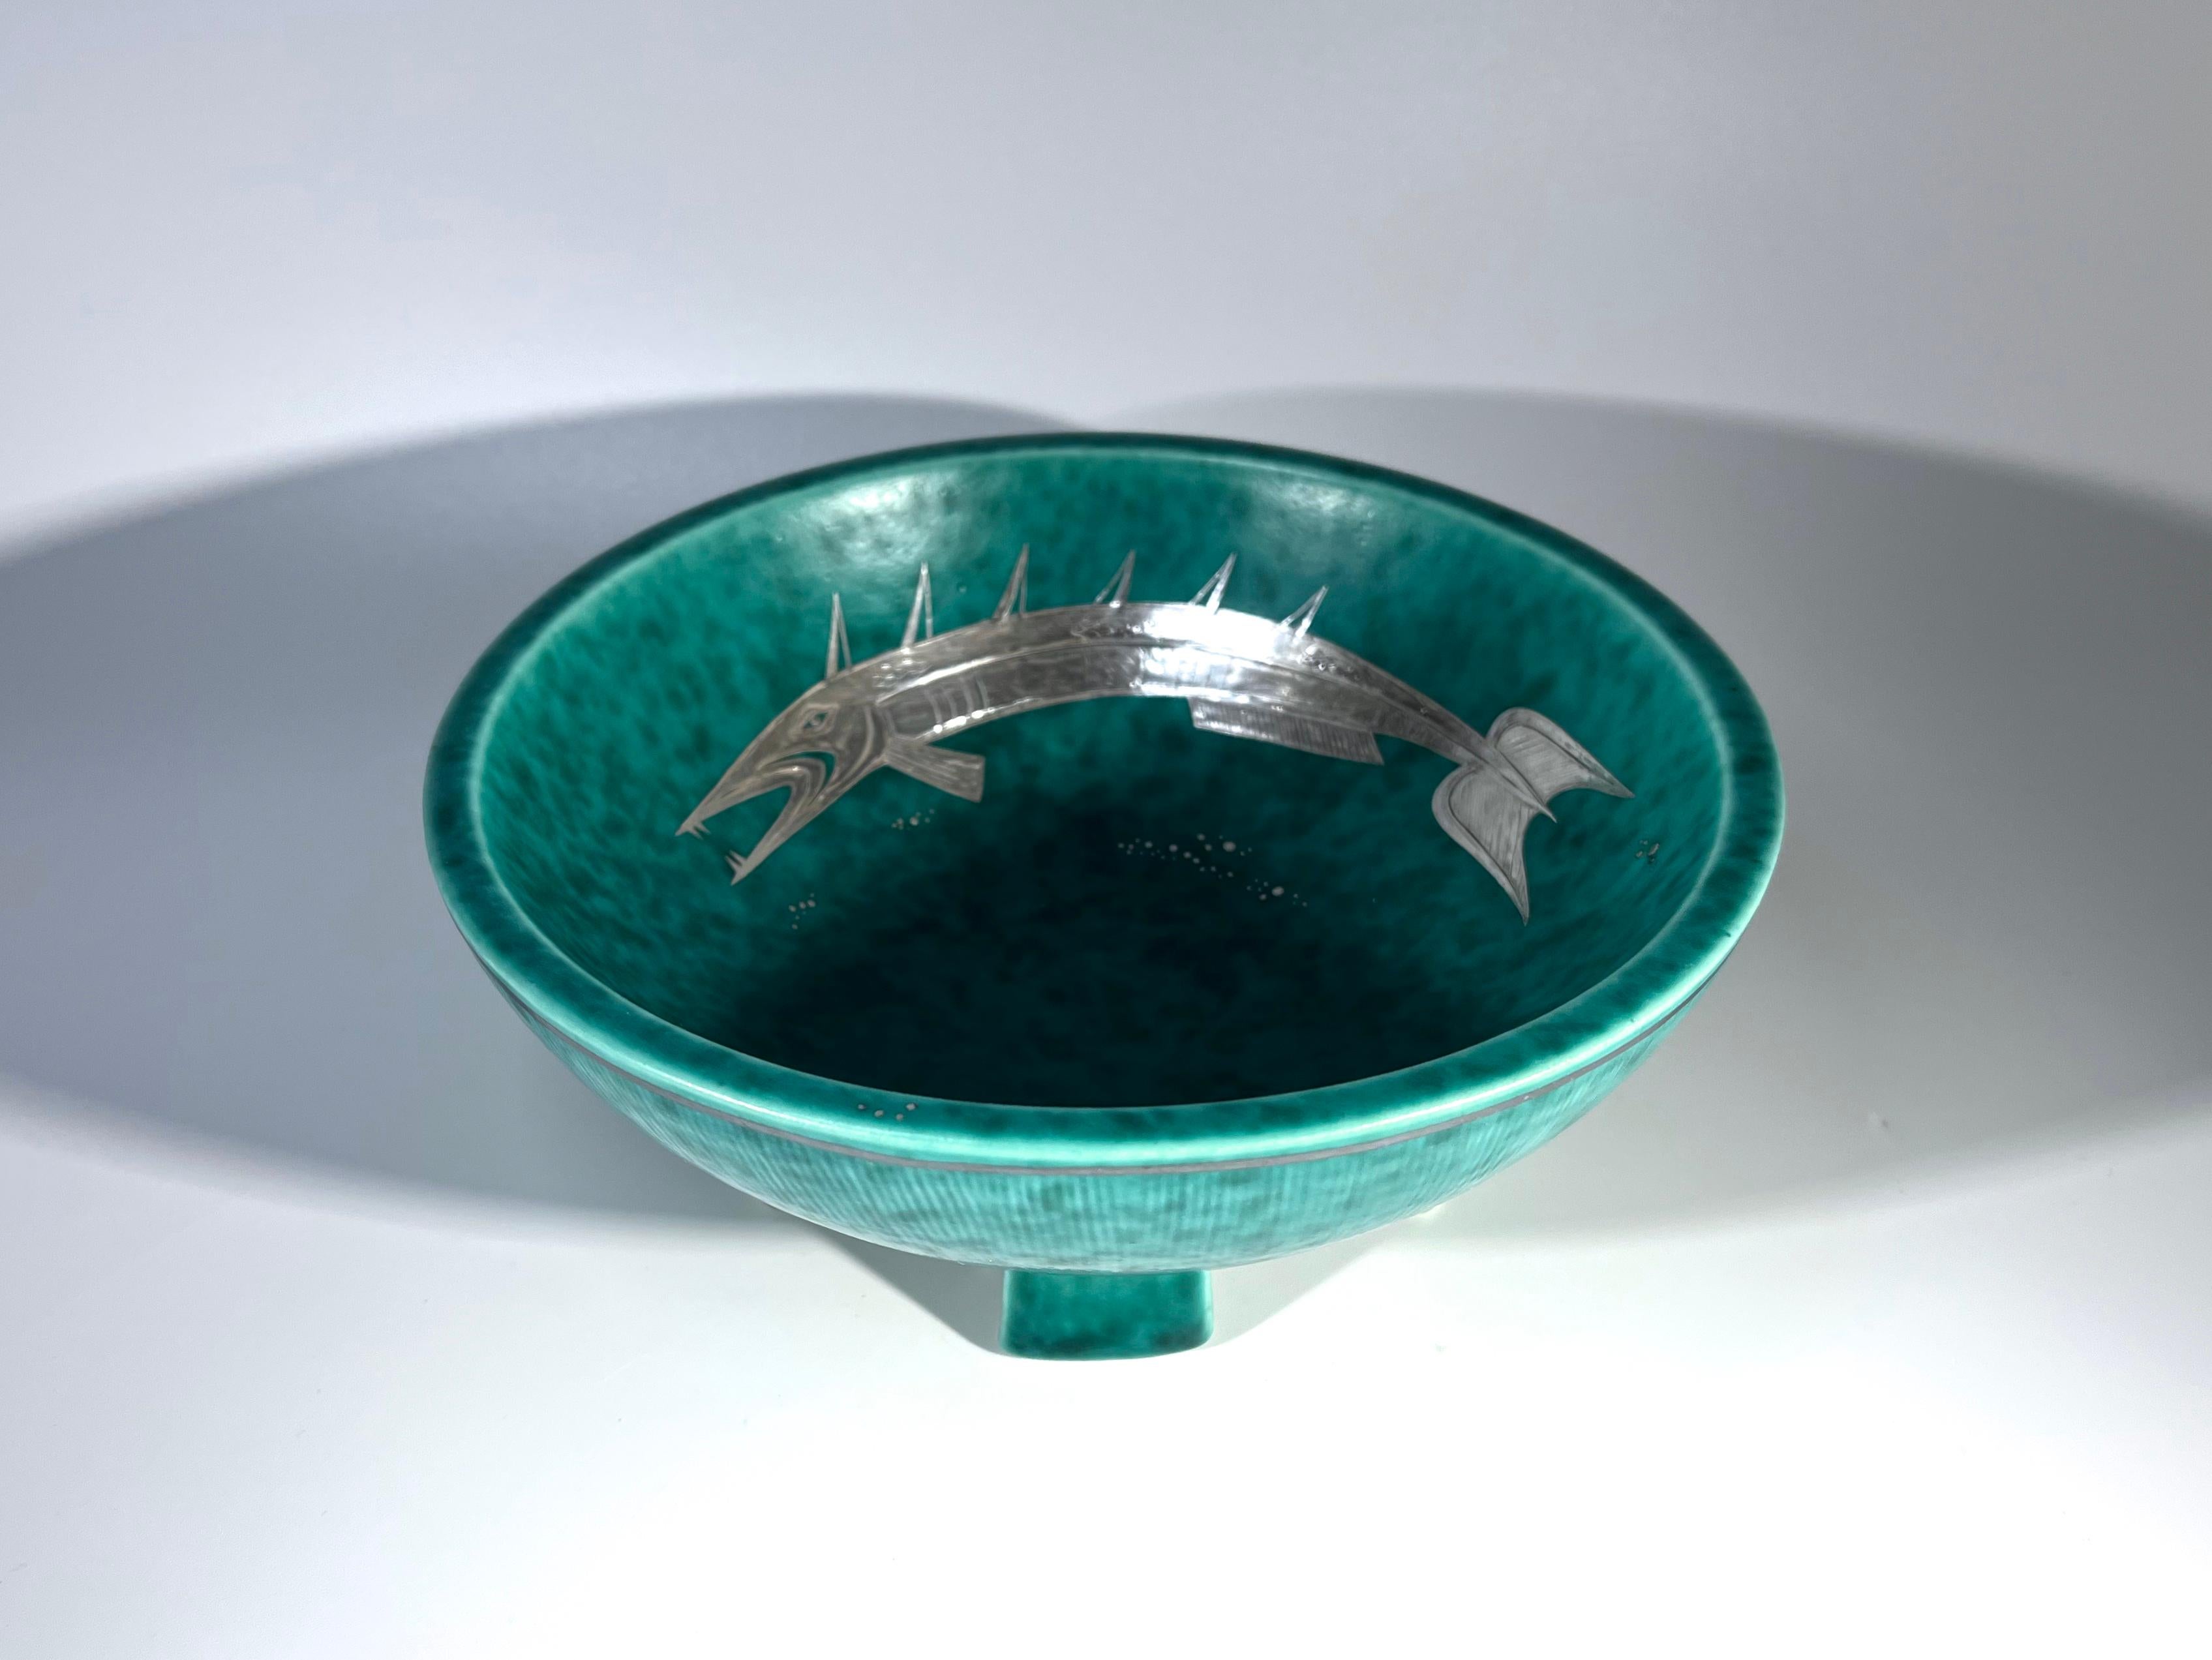 An extravagant Argenta stoneware, five legged fish bowl by Wilhelm Kage for Gustavsberg, Sweden 
A fascinating barbed fish of applied silver, decorates the interior of this tactile and dramatic piece
Circa 1932. Date letter B
Stamped Argenta A10 on